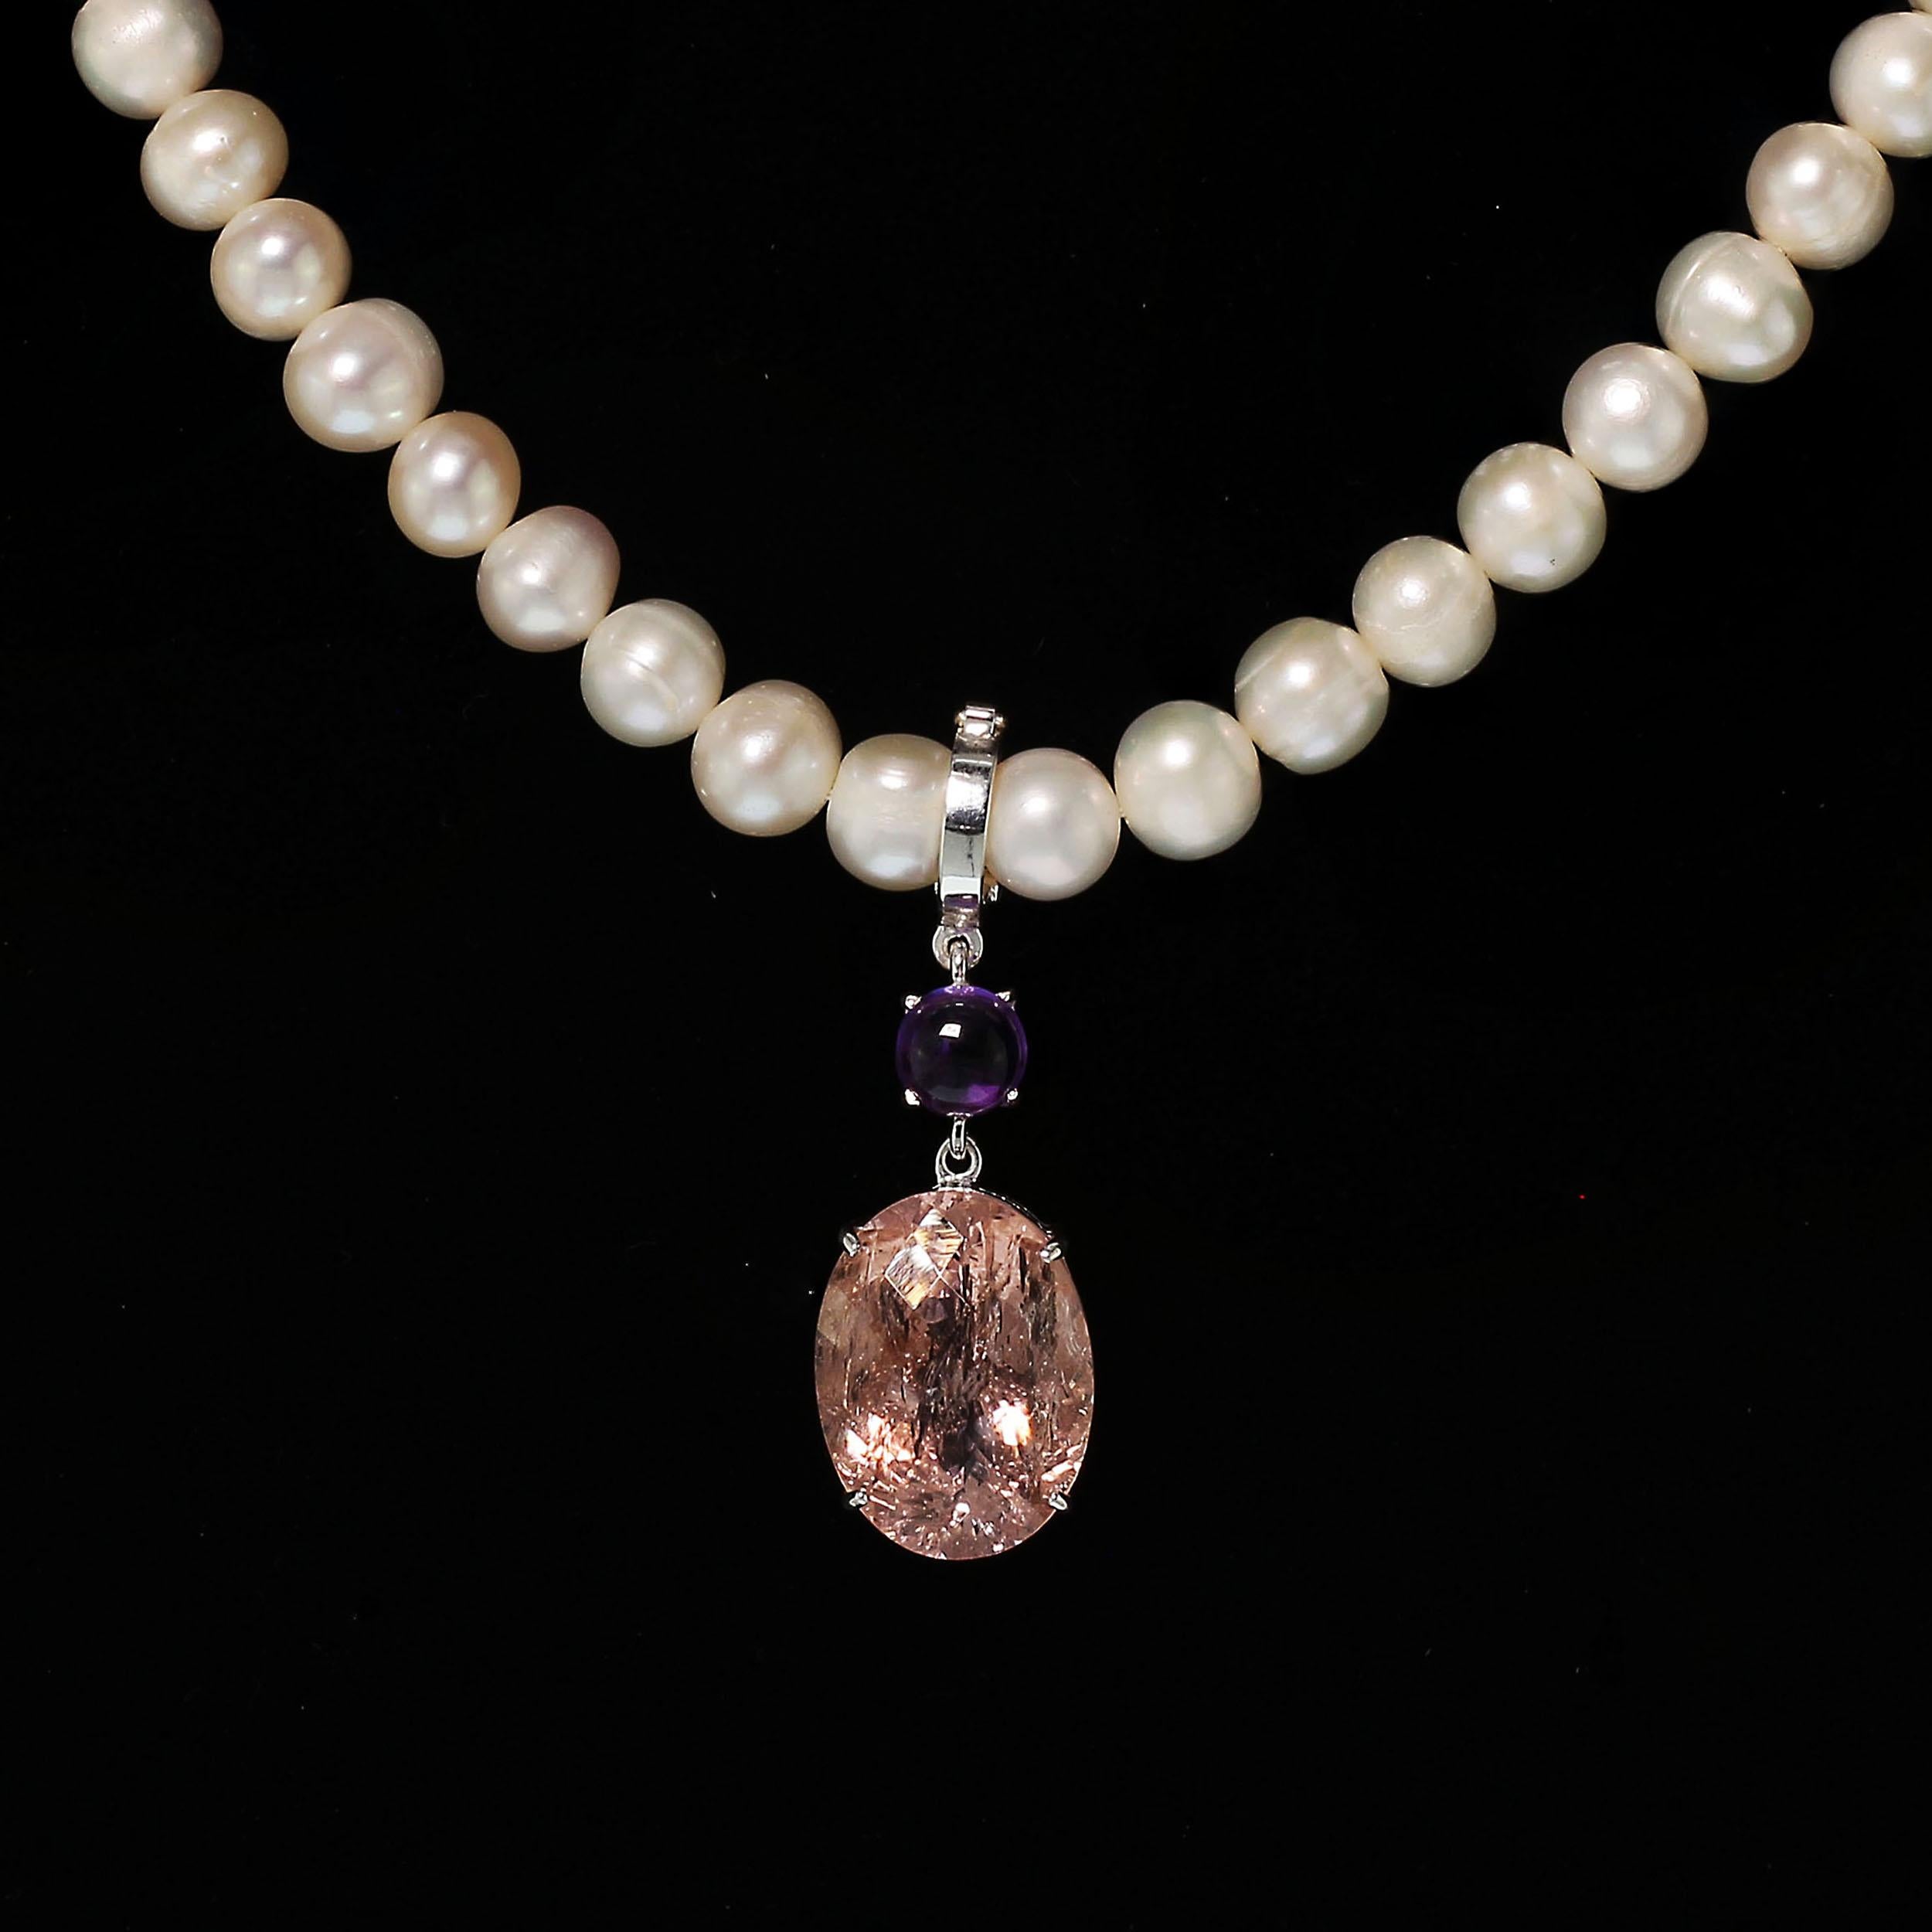 Pendant of oval Morganite ﻿with checkerboard table sparkles and pops with all the typical beryl inclusions swinging from a round glowing Amethyst. This hinged Sterling Silver bail works perfectly over your favorite pearls, chains, or other